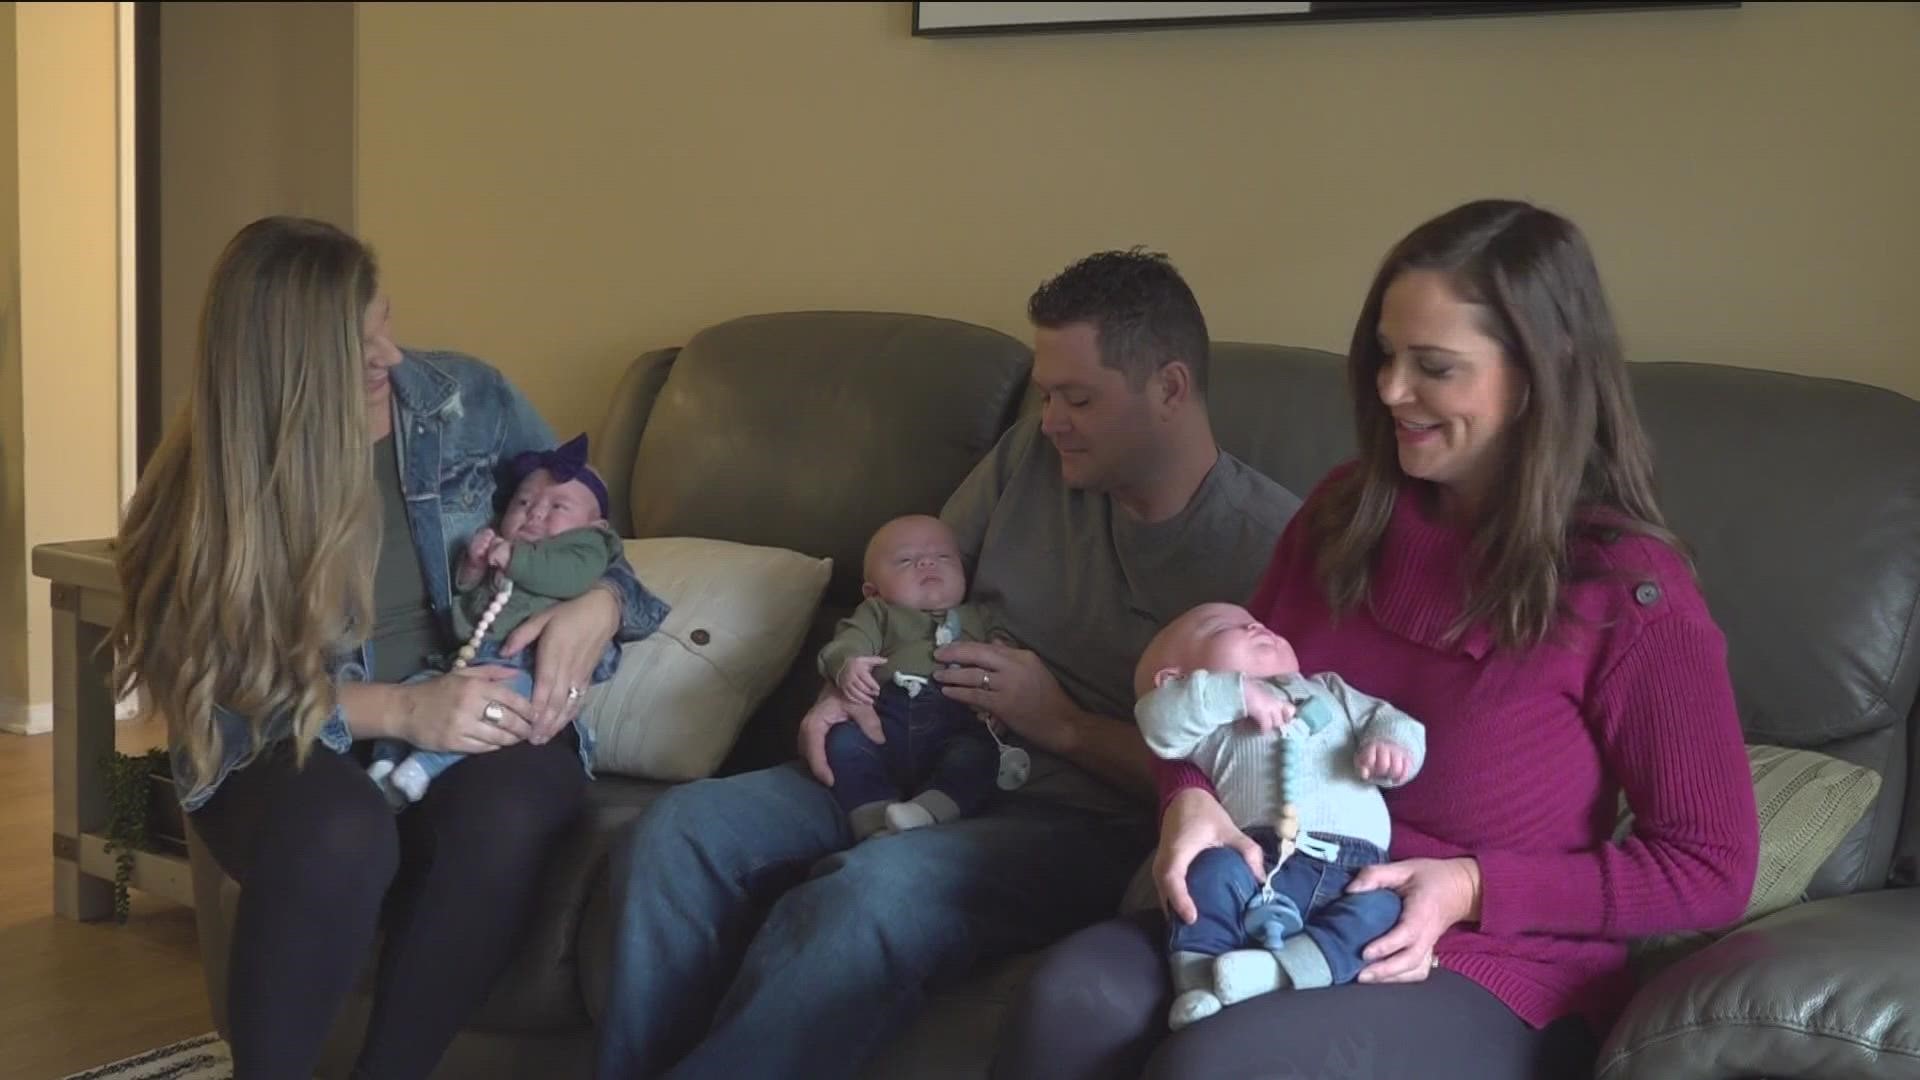 A Chula Vista couple dreamed of having a baby for two years and had more than just one. They want to inspire hopeful parents never to give up.